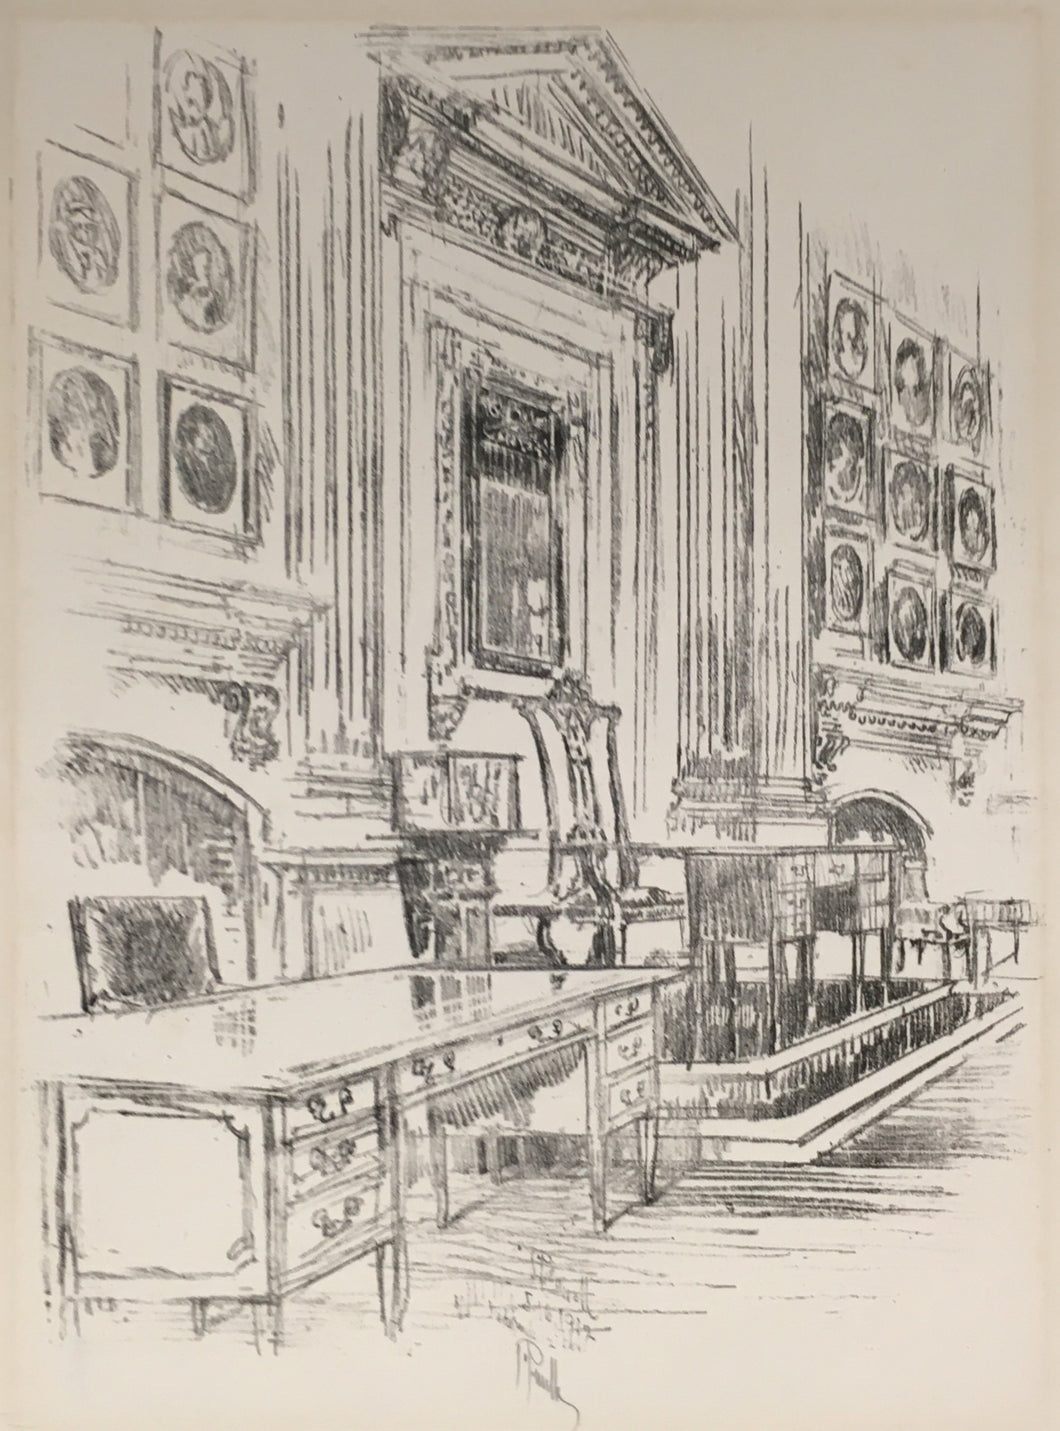 Pennell, Joseph  “Table and Chair, Signers’ Room, Independence Hall.”  [Philadelphia]